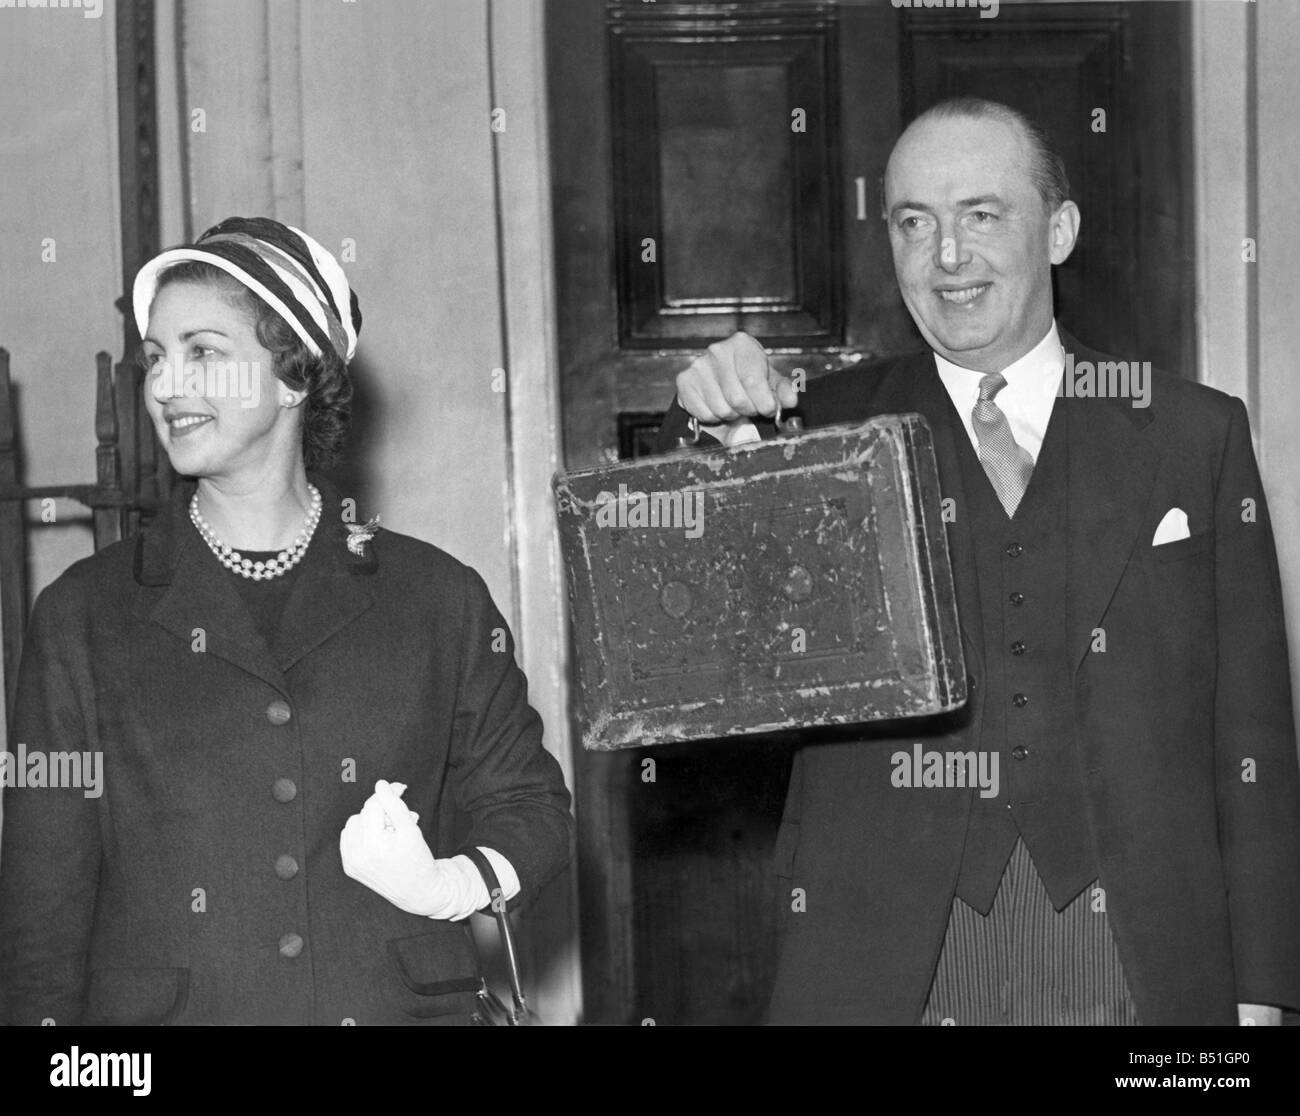 The Chancellor of the Exchequer (George Edward) Peter Thorneycroft is here seen holding up the budget box-when accompanied by his wife, he leaves no II. Downing St. for the house, this afternoon. April 1957 P000213; Stock Photo